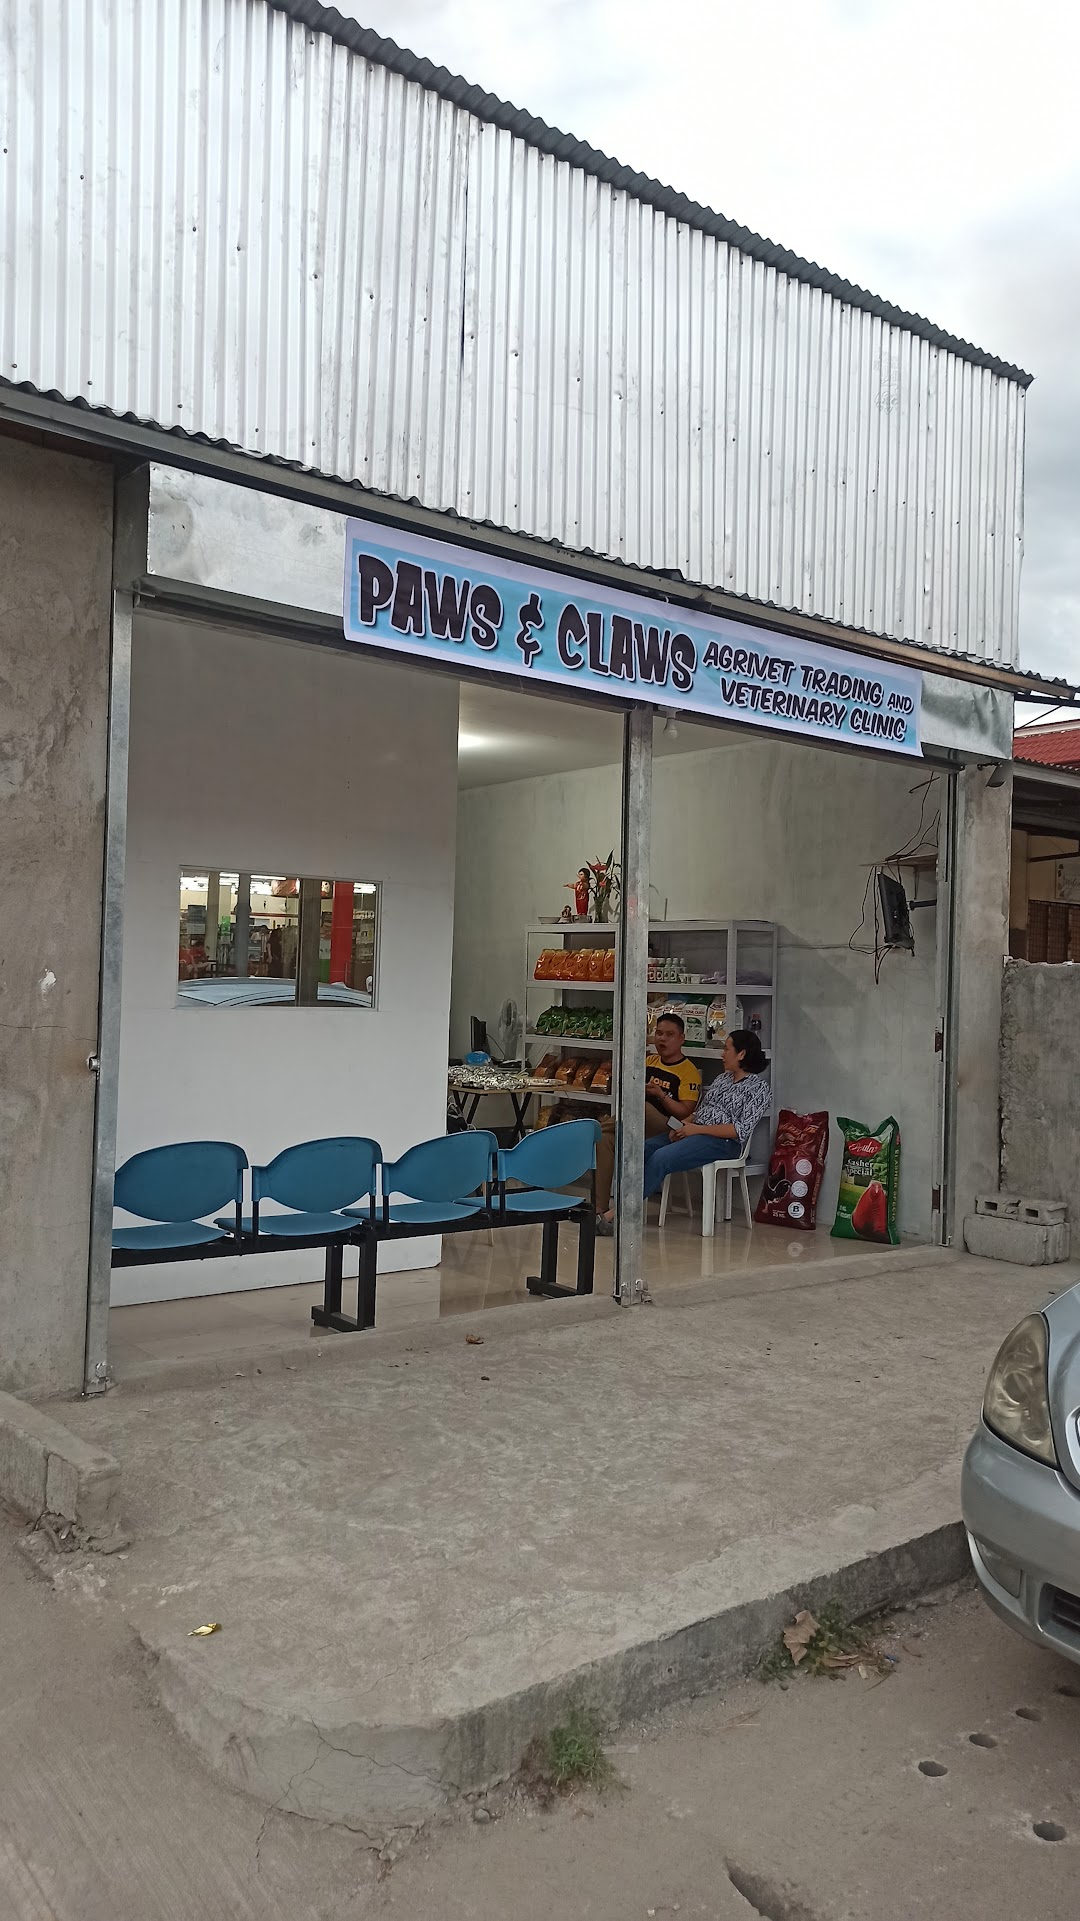 Paws & Claws Agrivet Trading and Veterinary Clinic